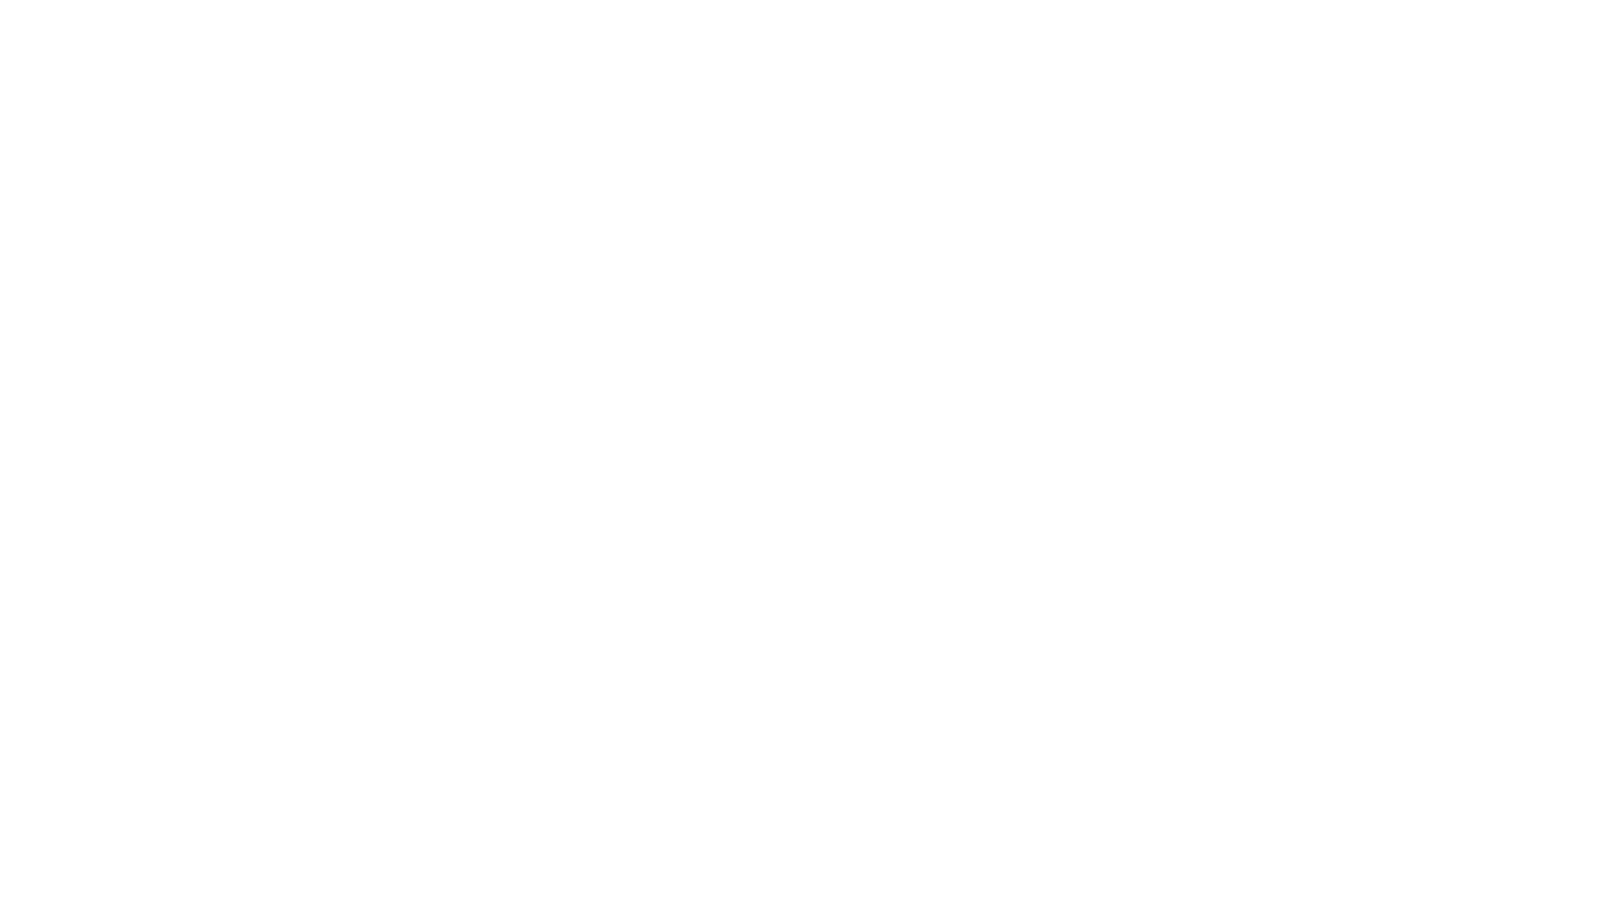 Embody Gaming Chair illustration featuring height and width specifications on a black background. 